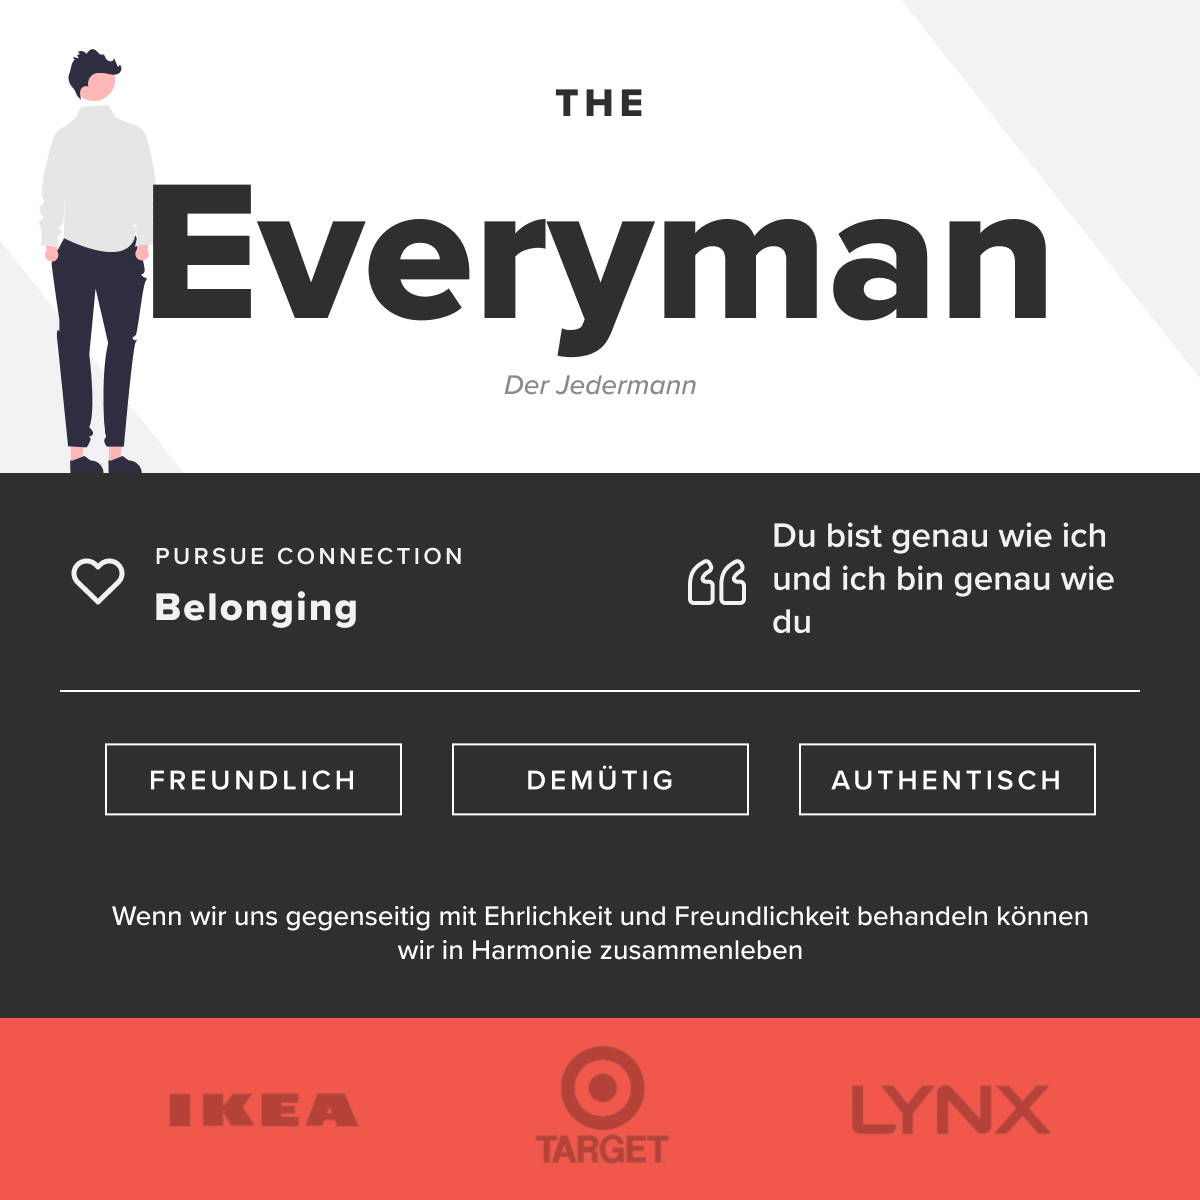 The everyman - a website with a picture of a man and a woman.